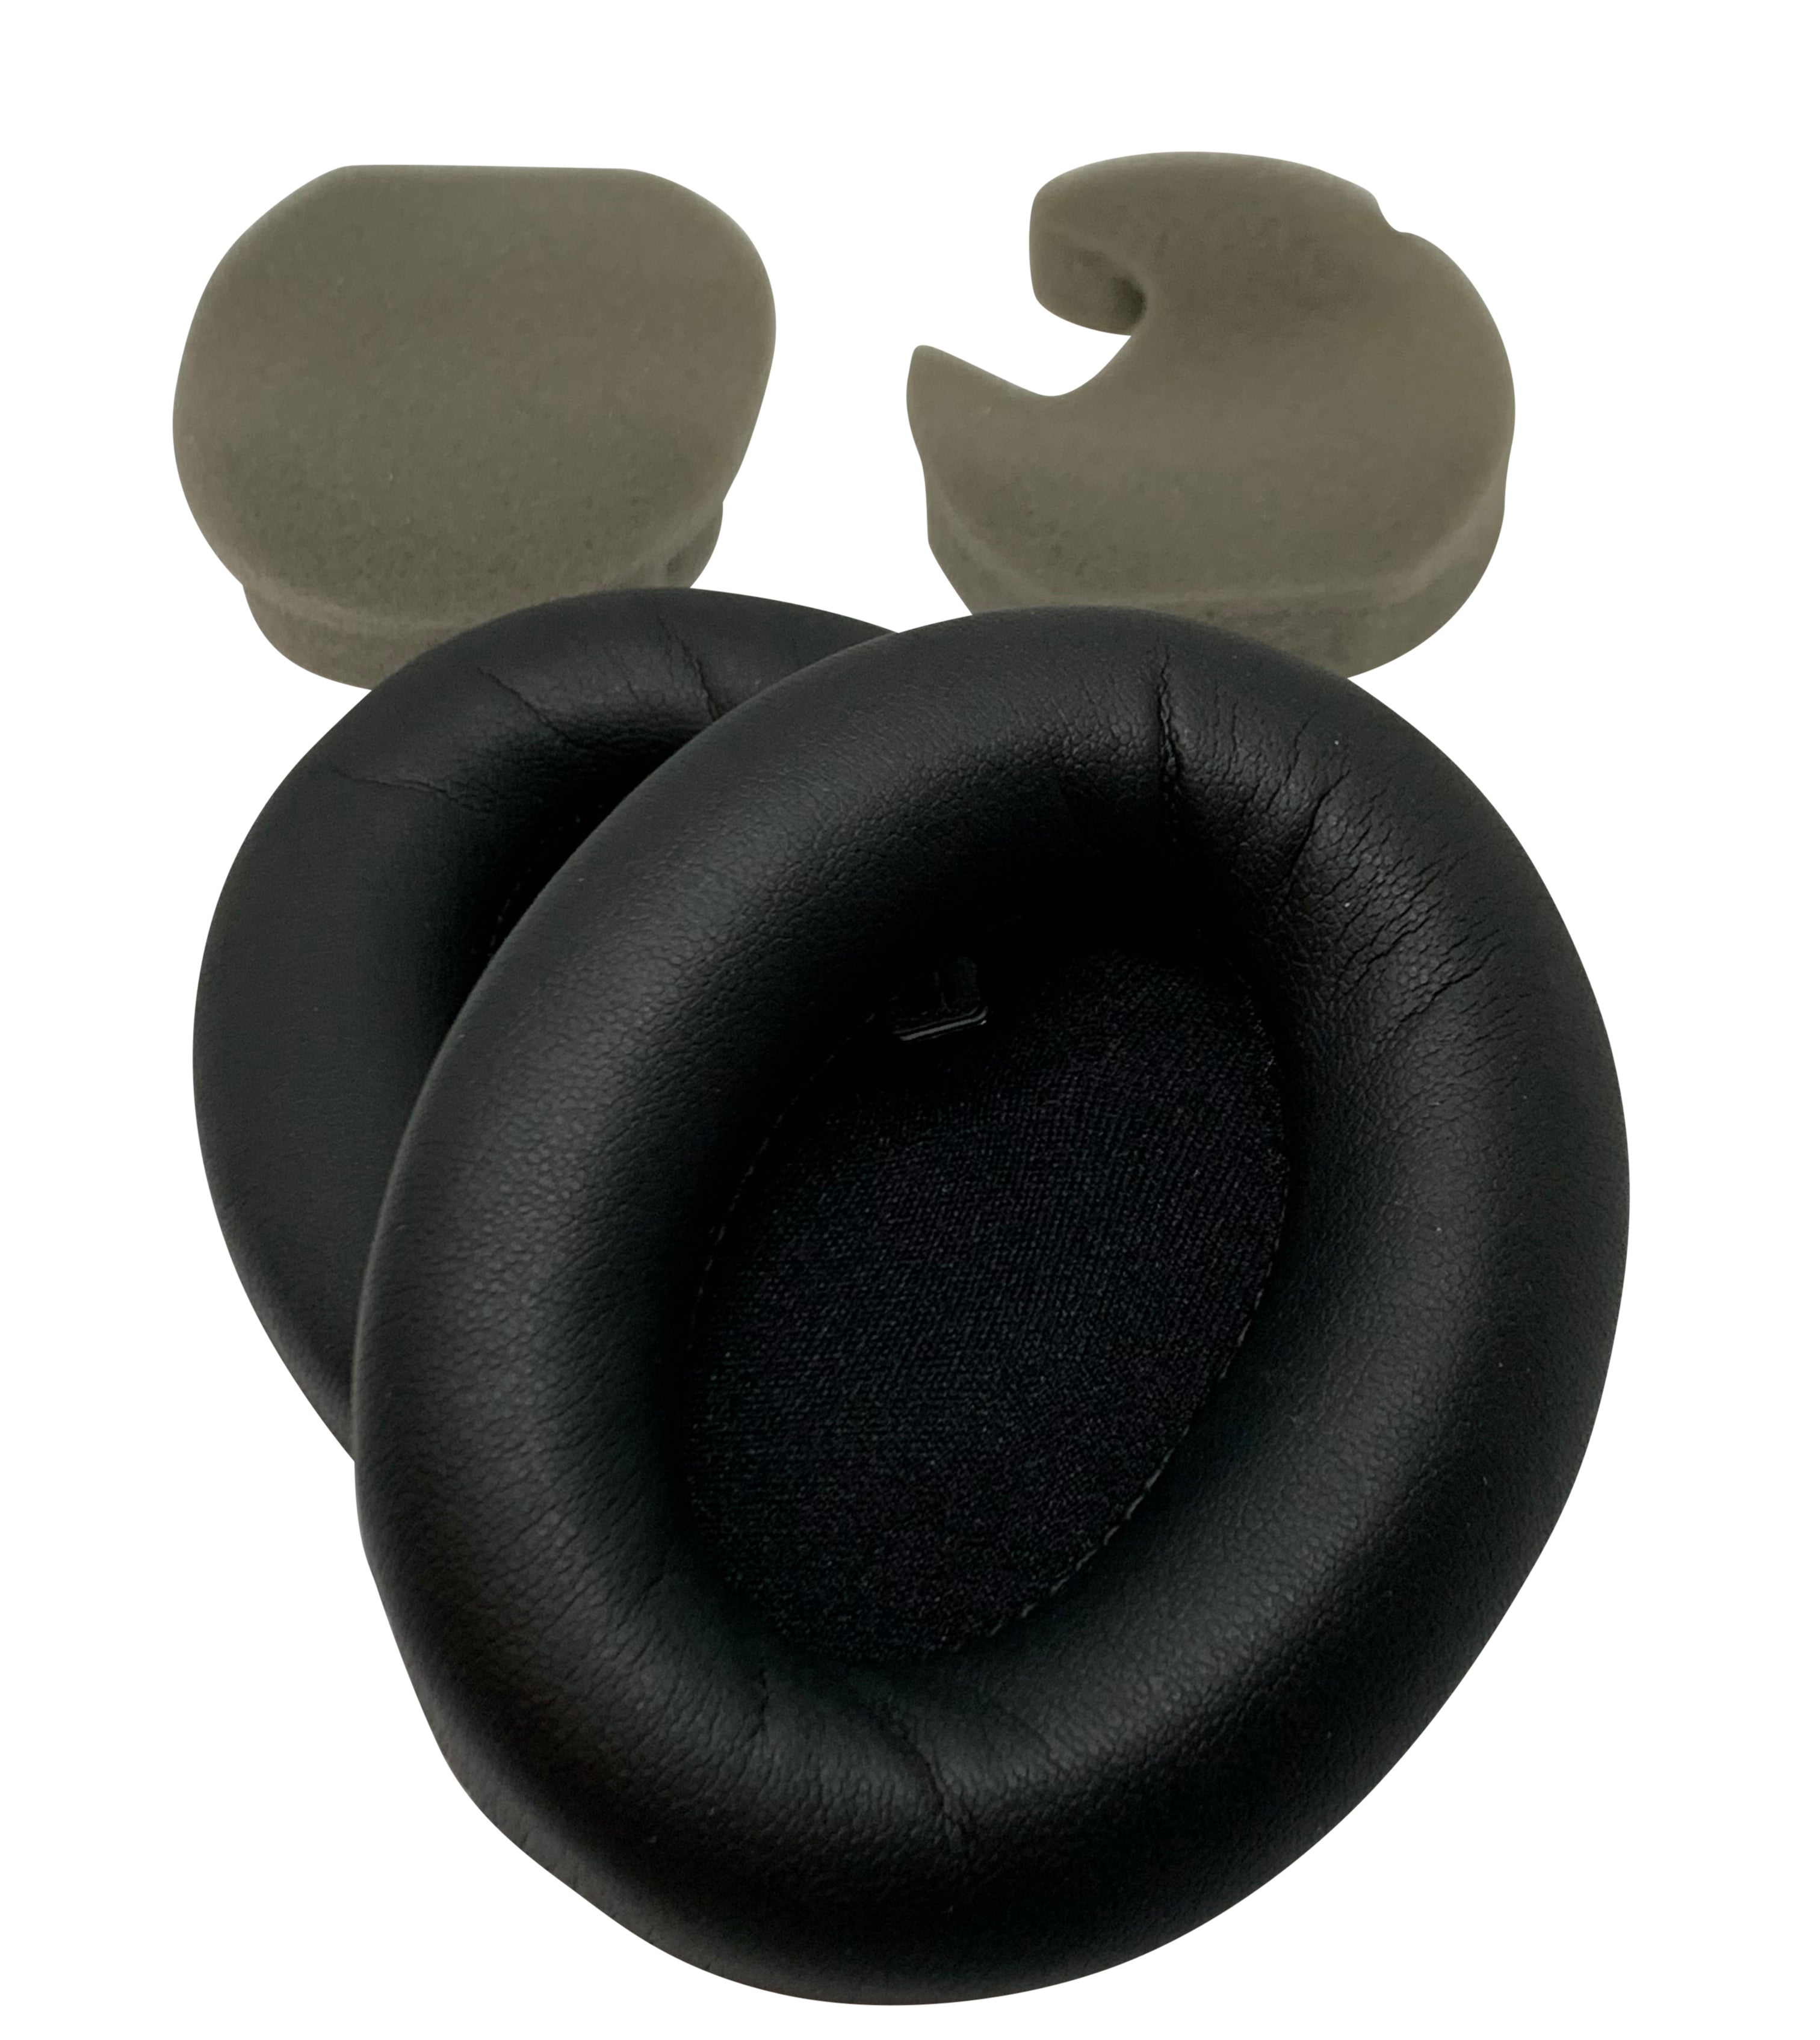 CentralSound Replacement Ear Pad Cushions for Sony WH-1000XM4 WH1000XM4 Headphones Black